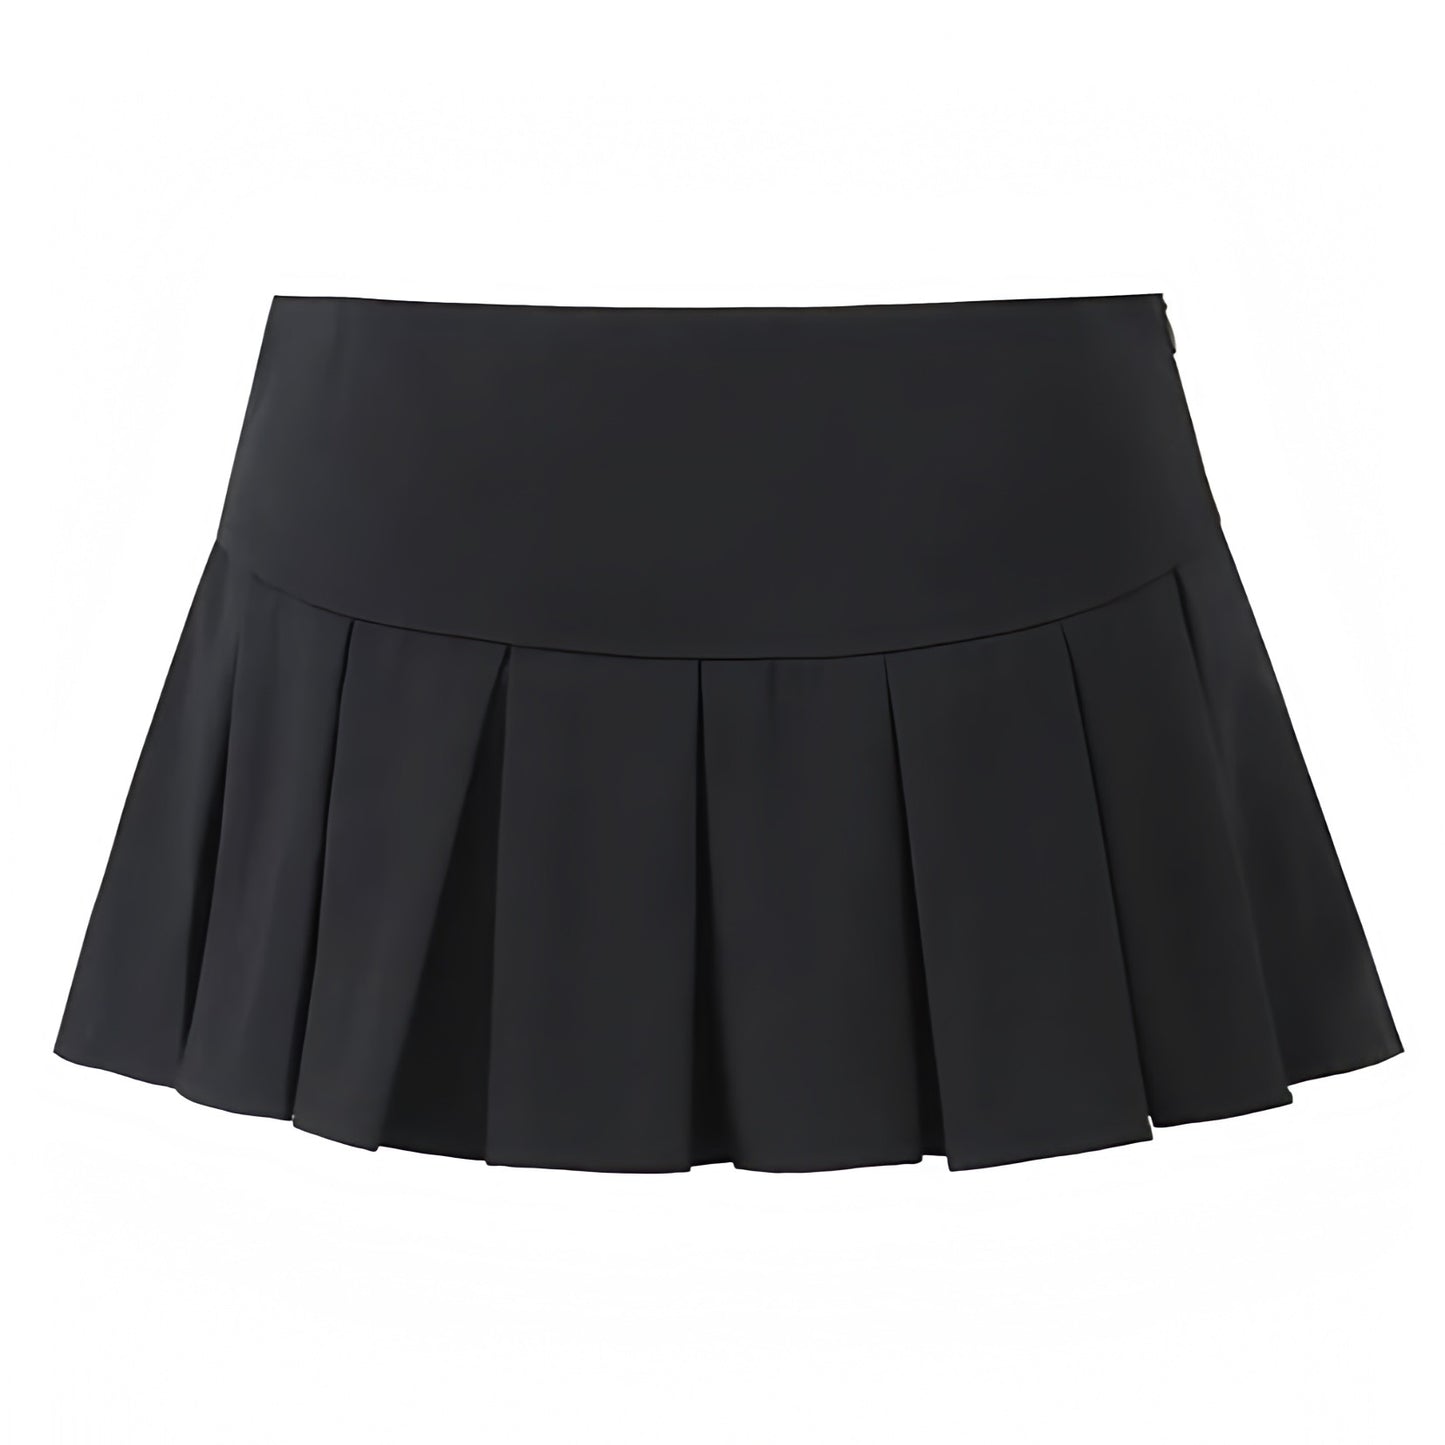 black-bow-pleated-slim-tight-fit-mid-low-rise-waisted-fitted-waist-short-micro-mini-skirt-skort-with-shorts-women-ladies-chic-trendy-spring-2024-summer-casual-feminine-office-siren-90s-minimalist-coquette-blokette-preppy-school-academia-club-wear-night-out-sexy-party-korean-stockholm-style-zara-revolve-aritzia-brandy-melville-urban-outfitters